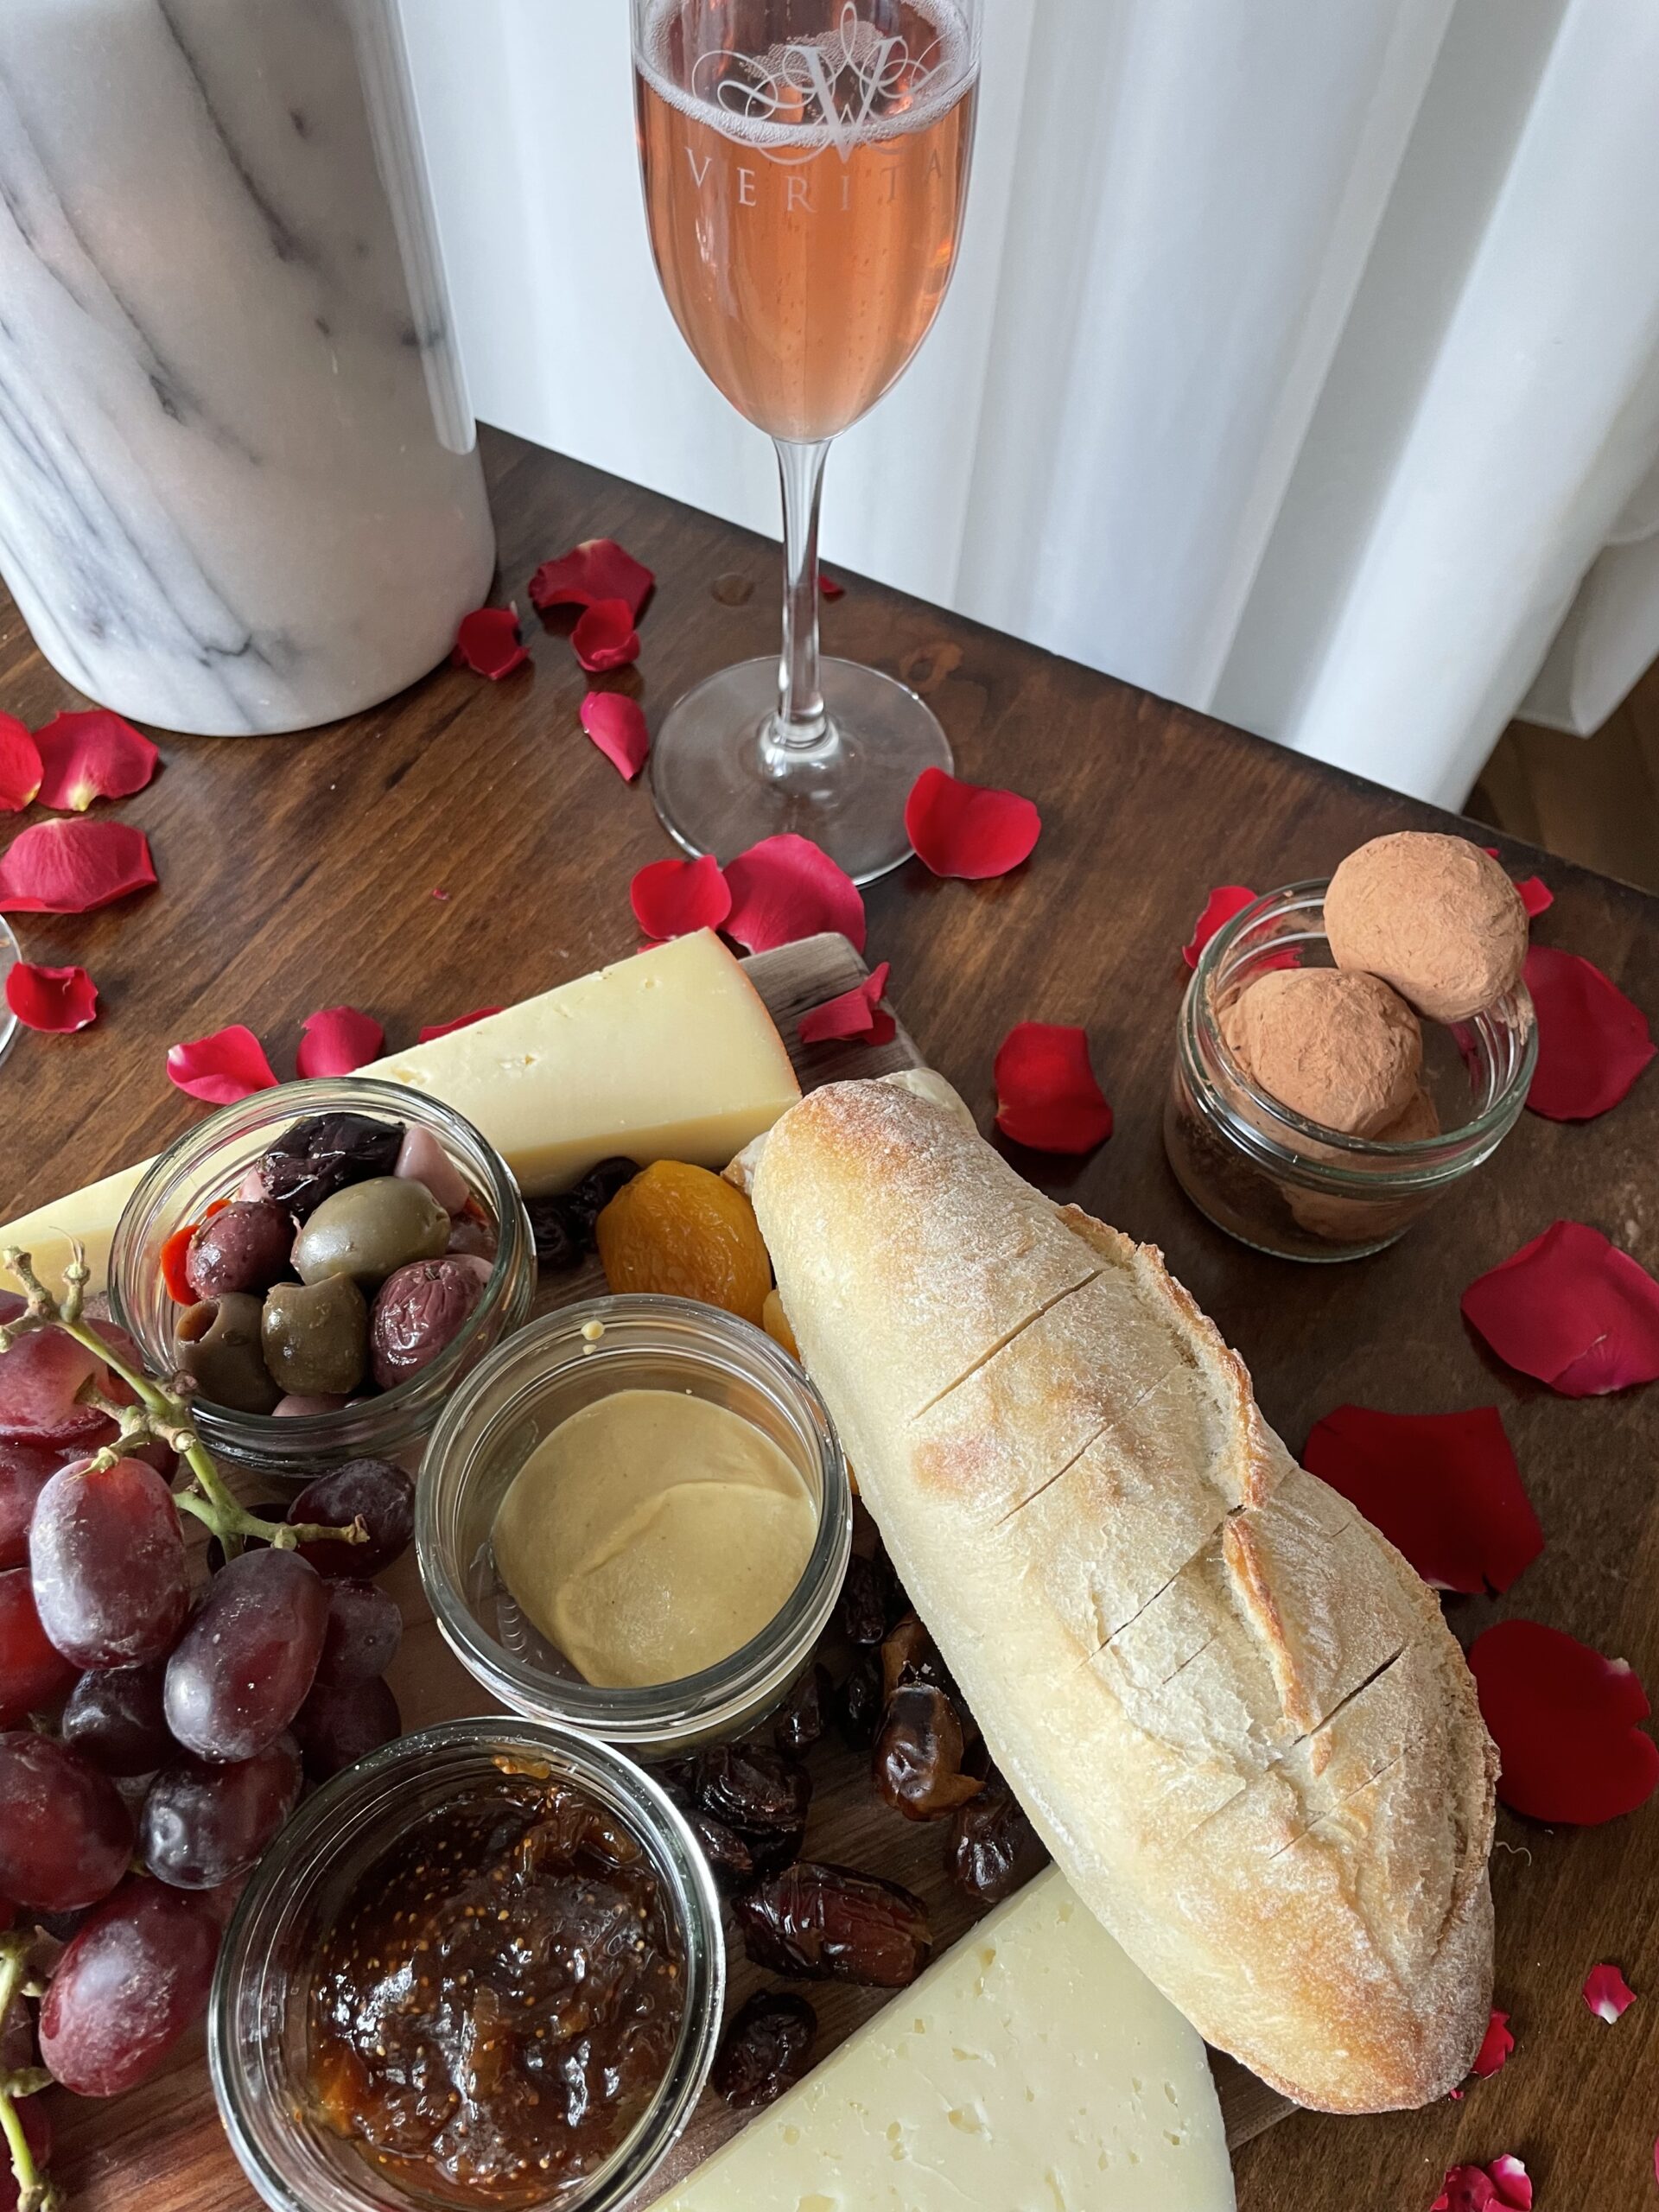 Glass of Veritas Sparkling Rosé, part of a charcuterie board, and small jar of chocolate truffles.